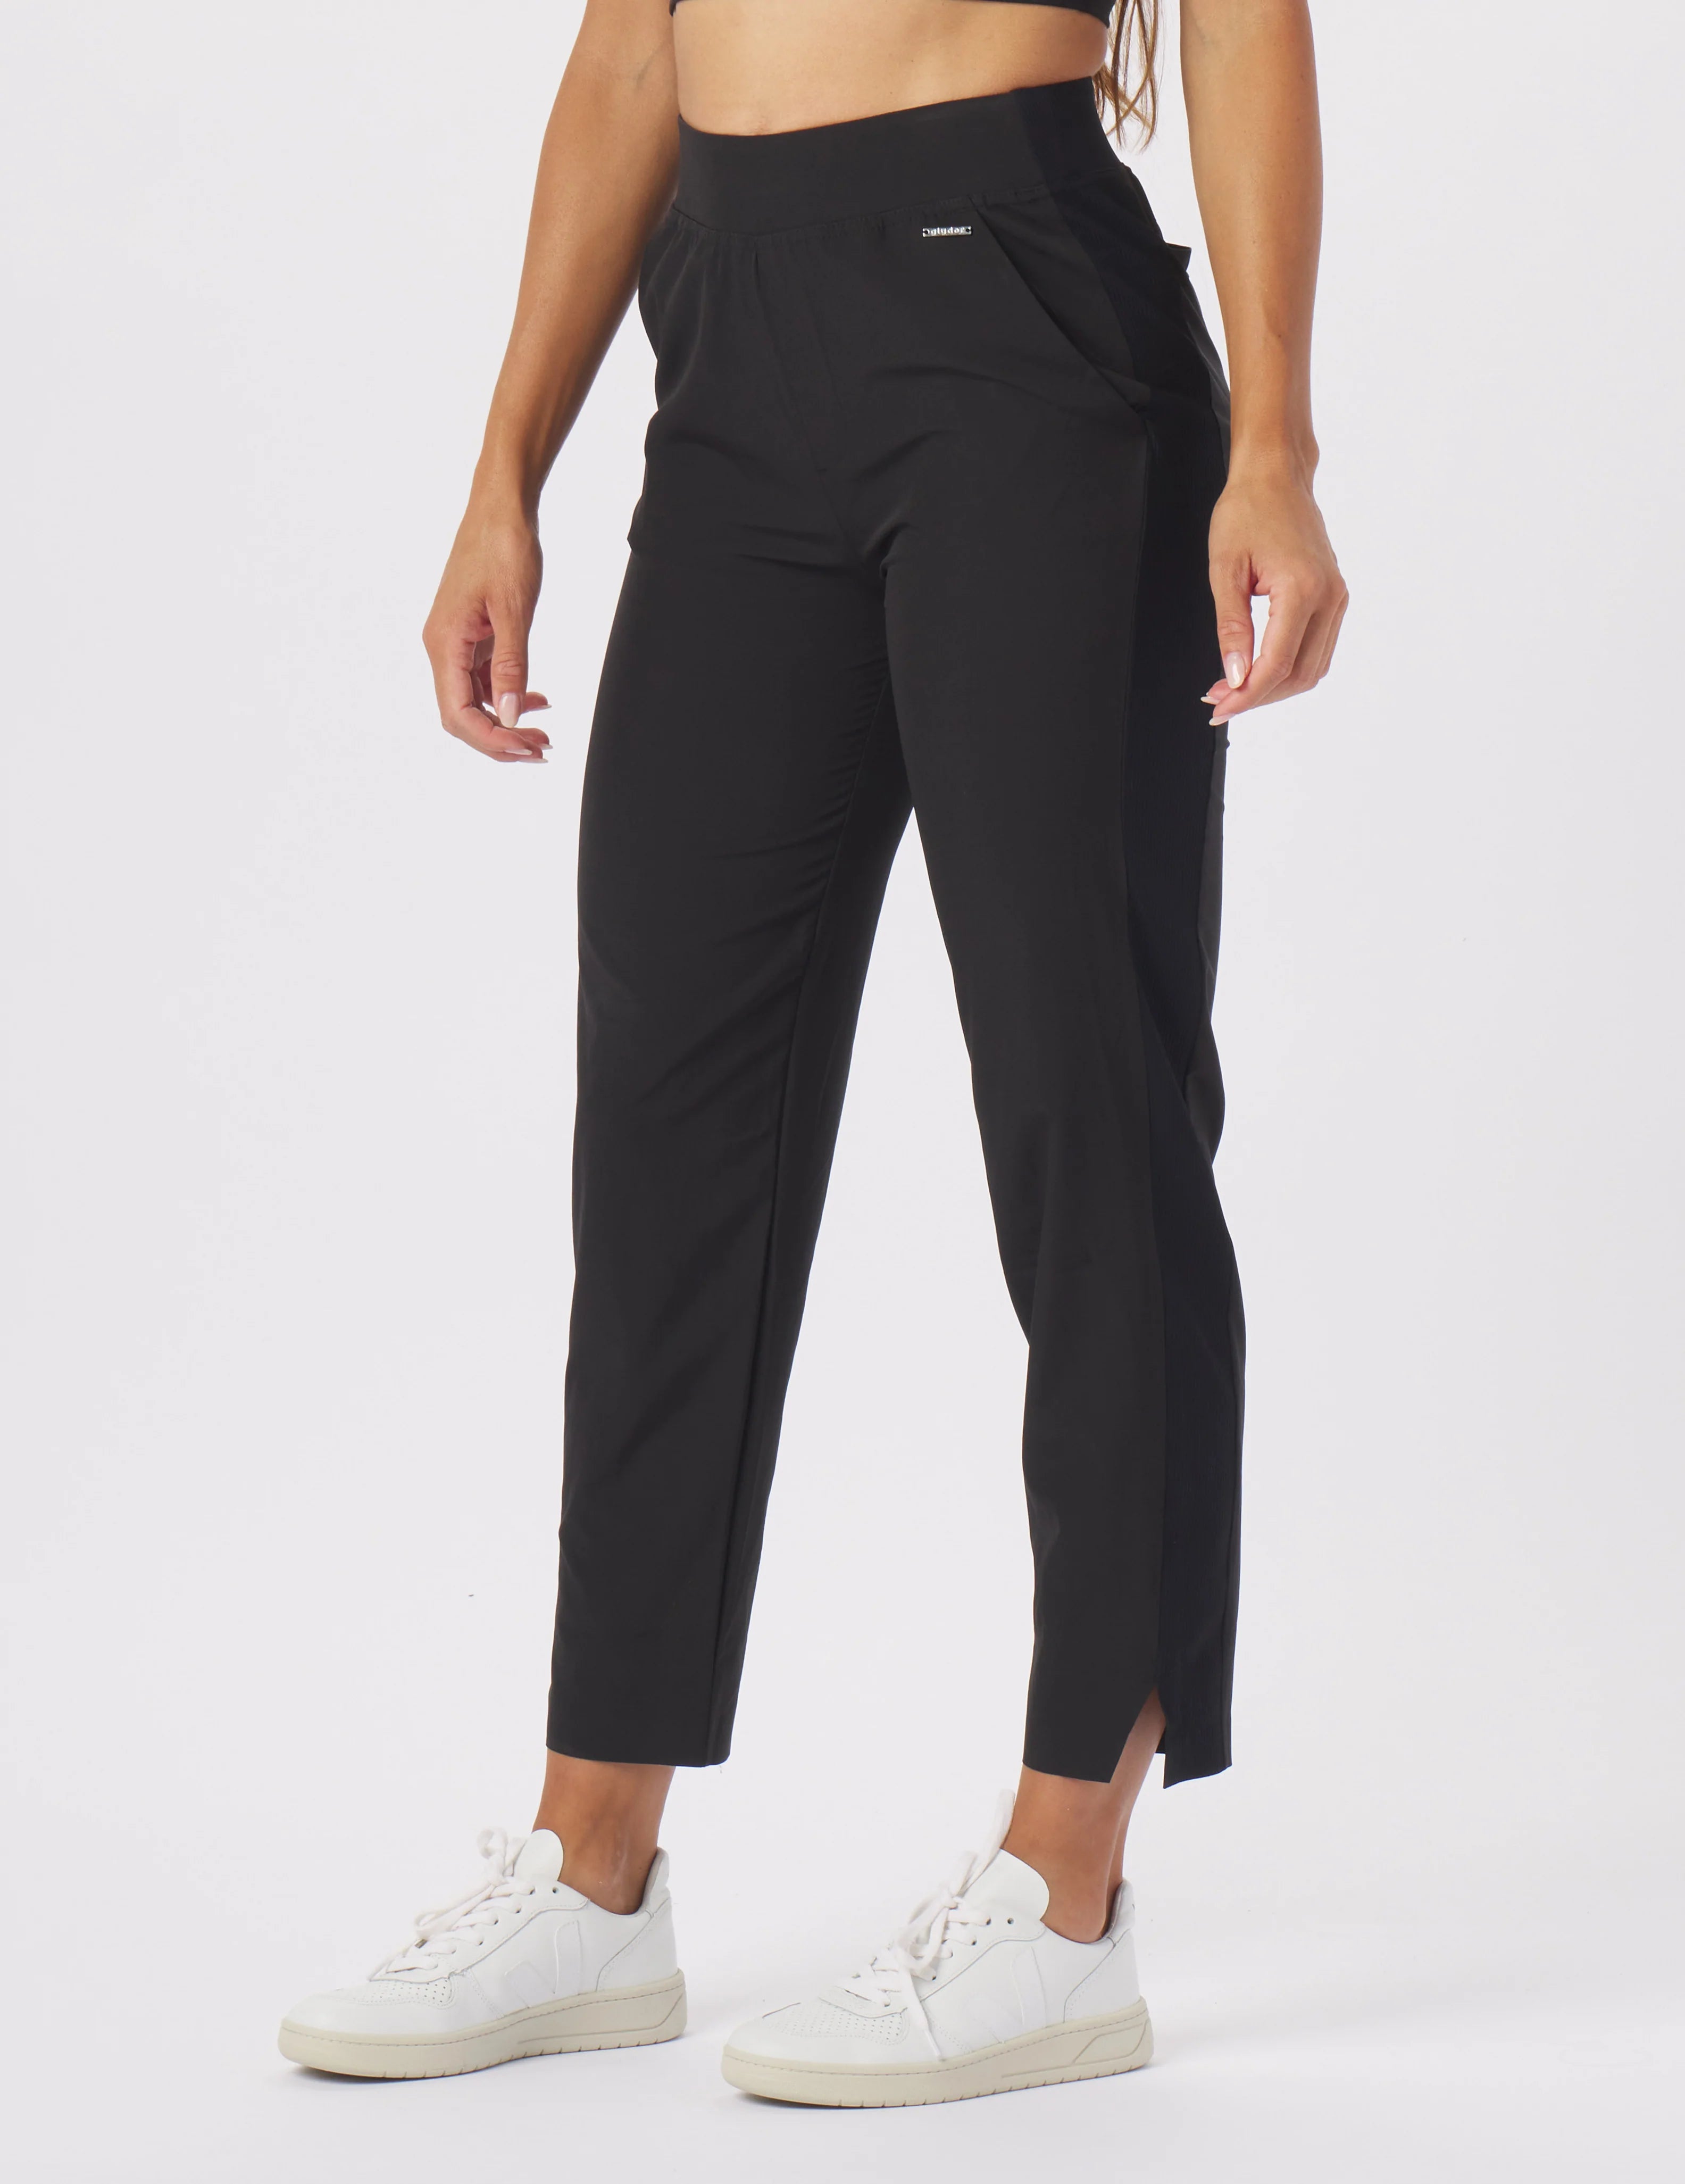 Cato Fashions | Cato Plus Size Stretchy Crepe Trouser Pants